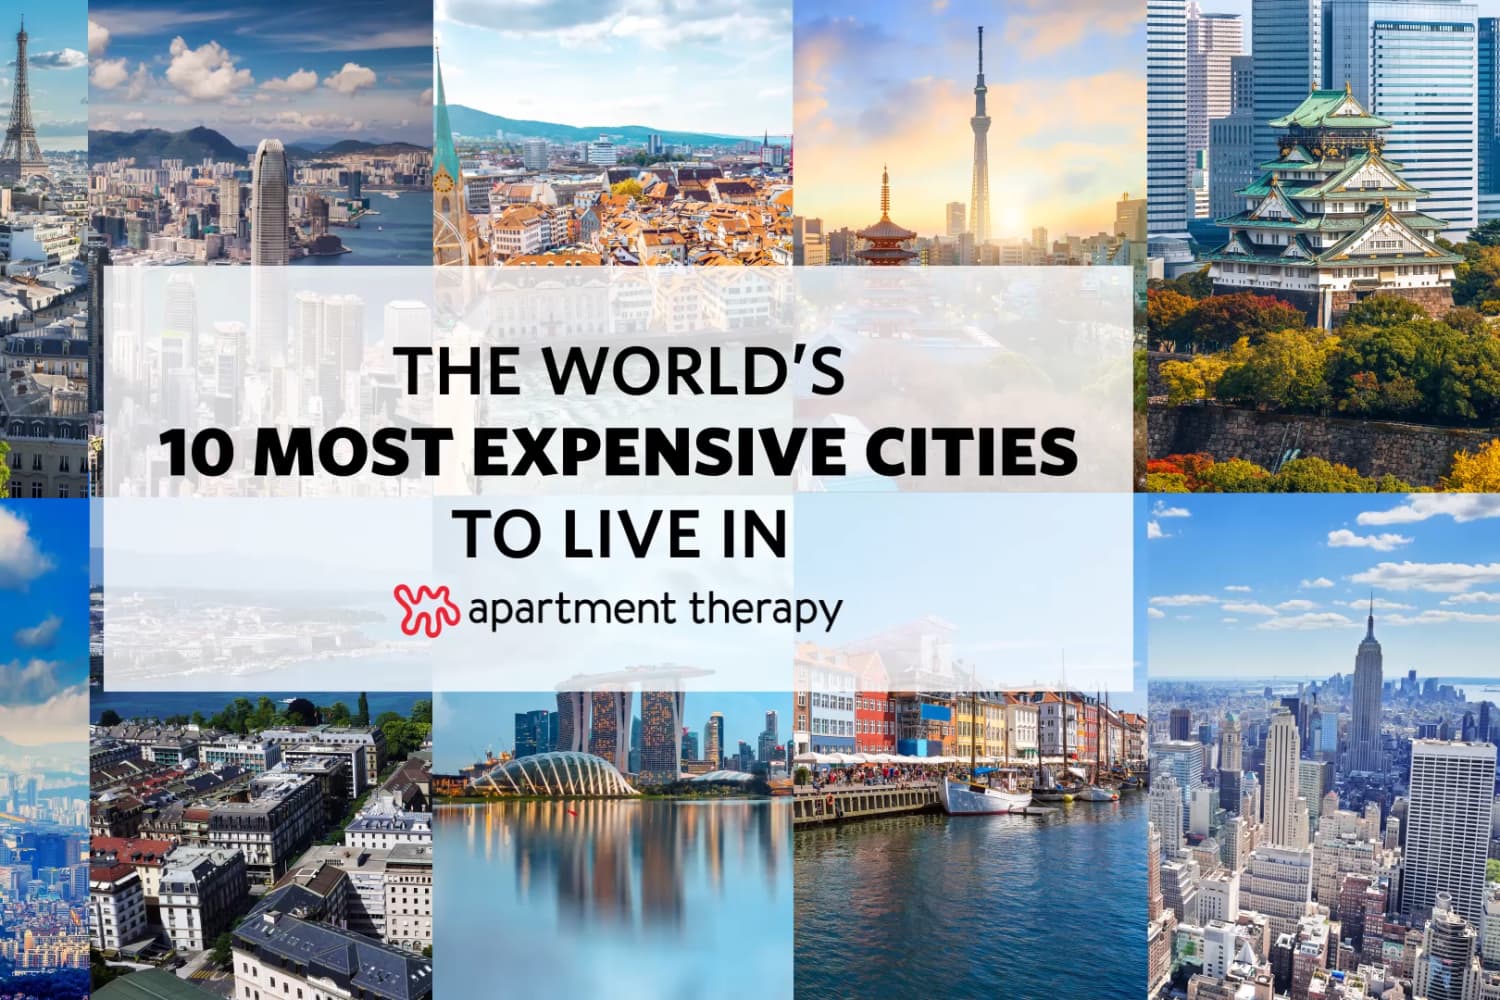 These Are the World's 10 Most Expensive Cities to Live in